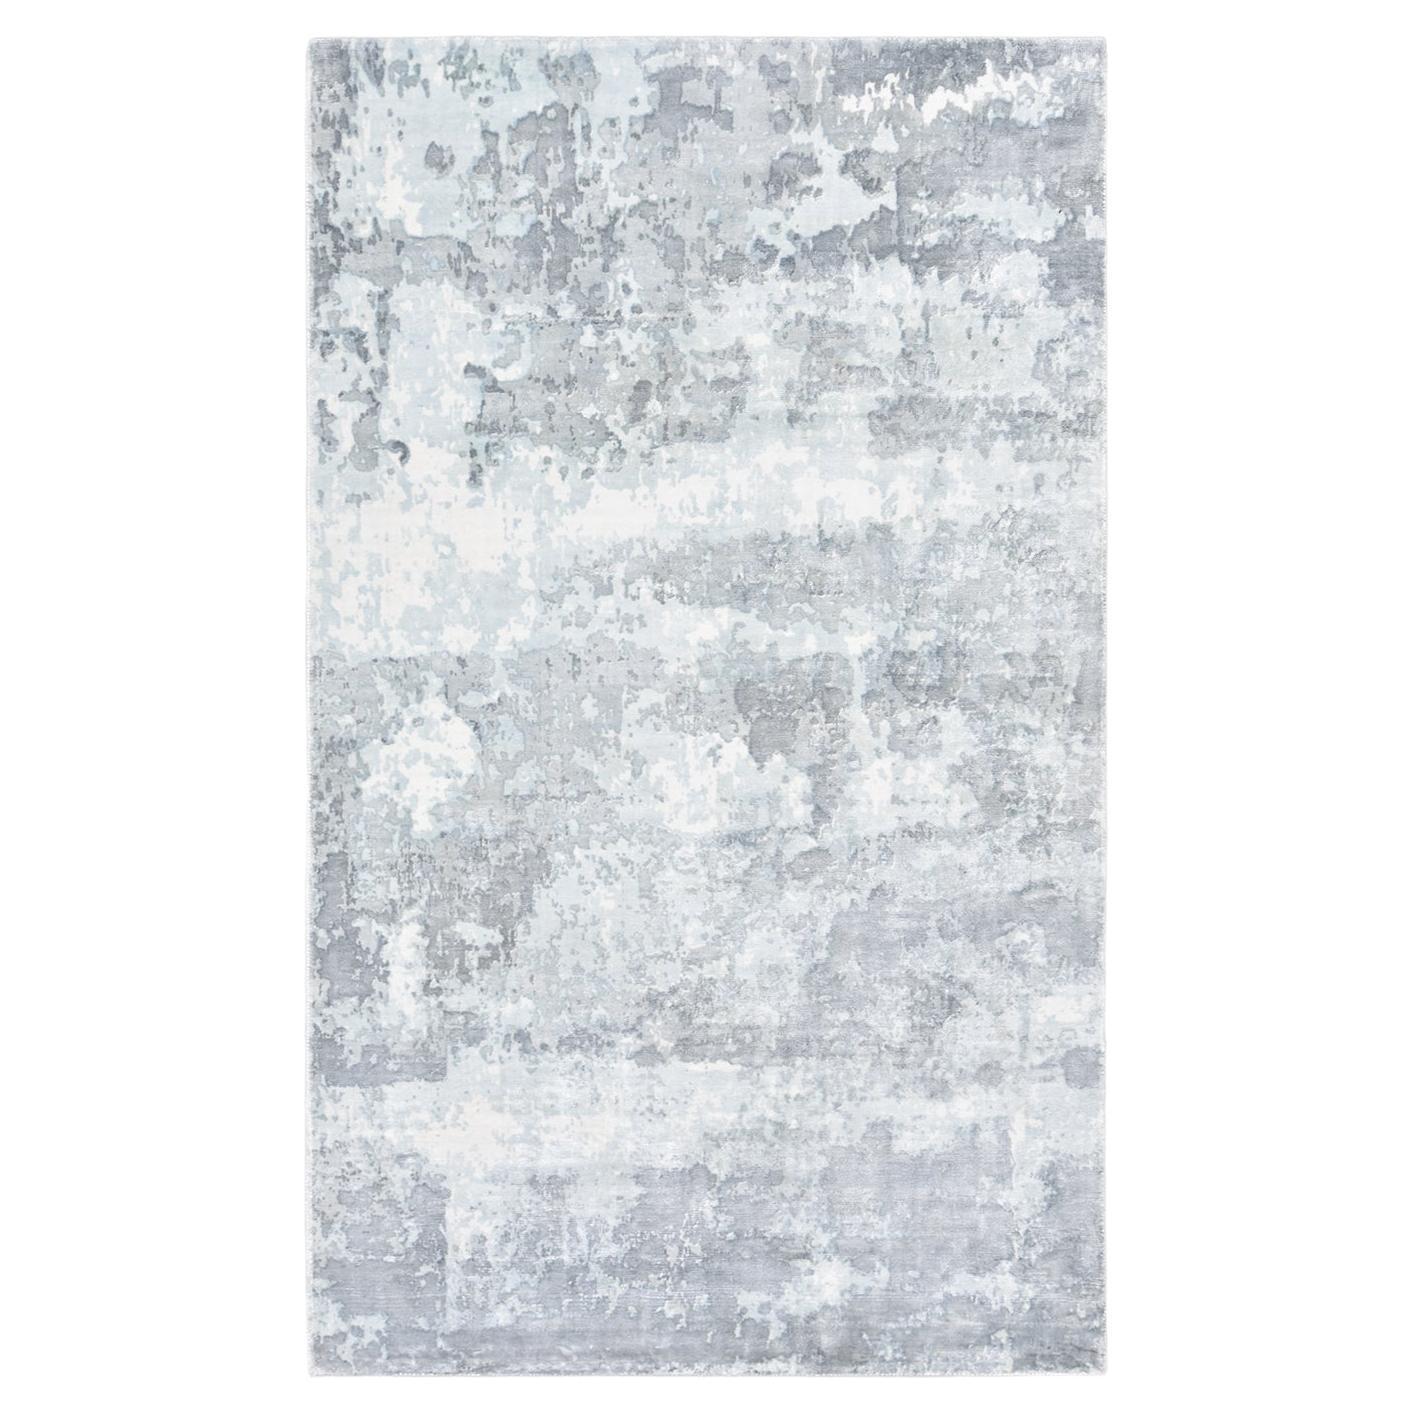 Solo Rugs Elbrus Contemporary Abstract Handmade Area Rug Ivory